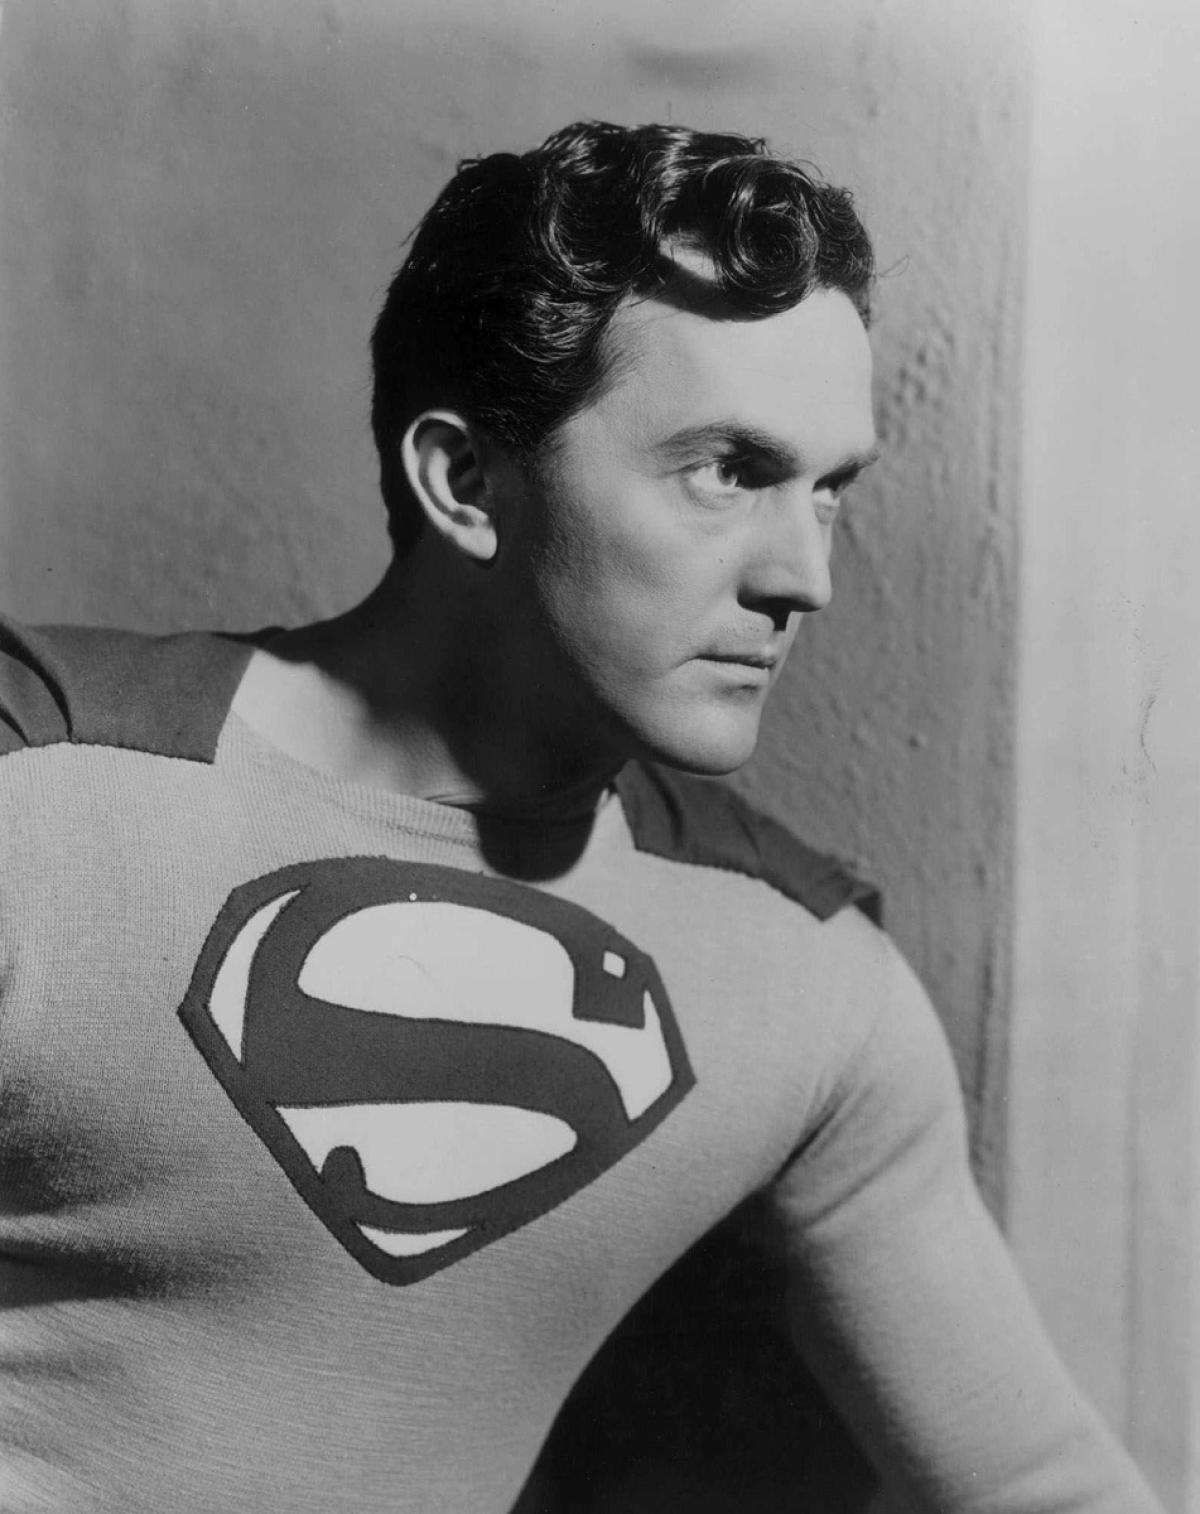 Kirk Alyn as Superman in a publicity still from 1948